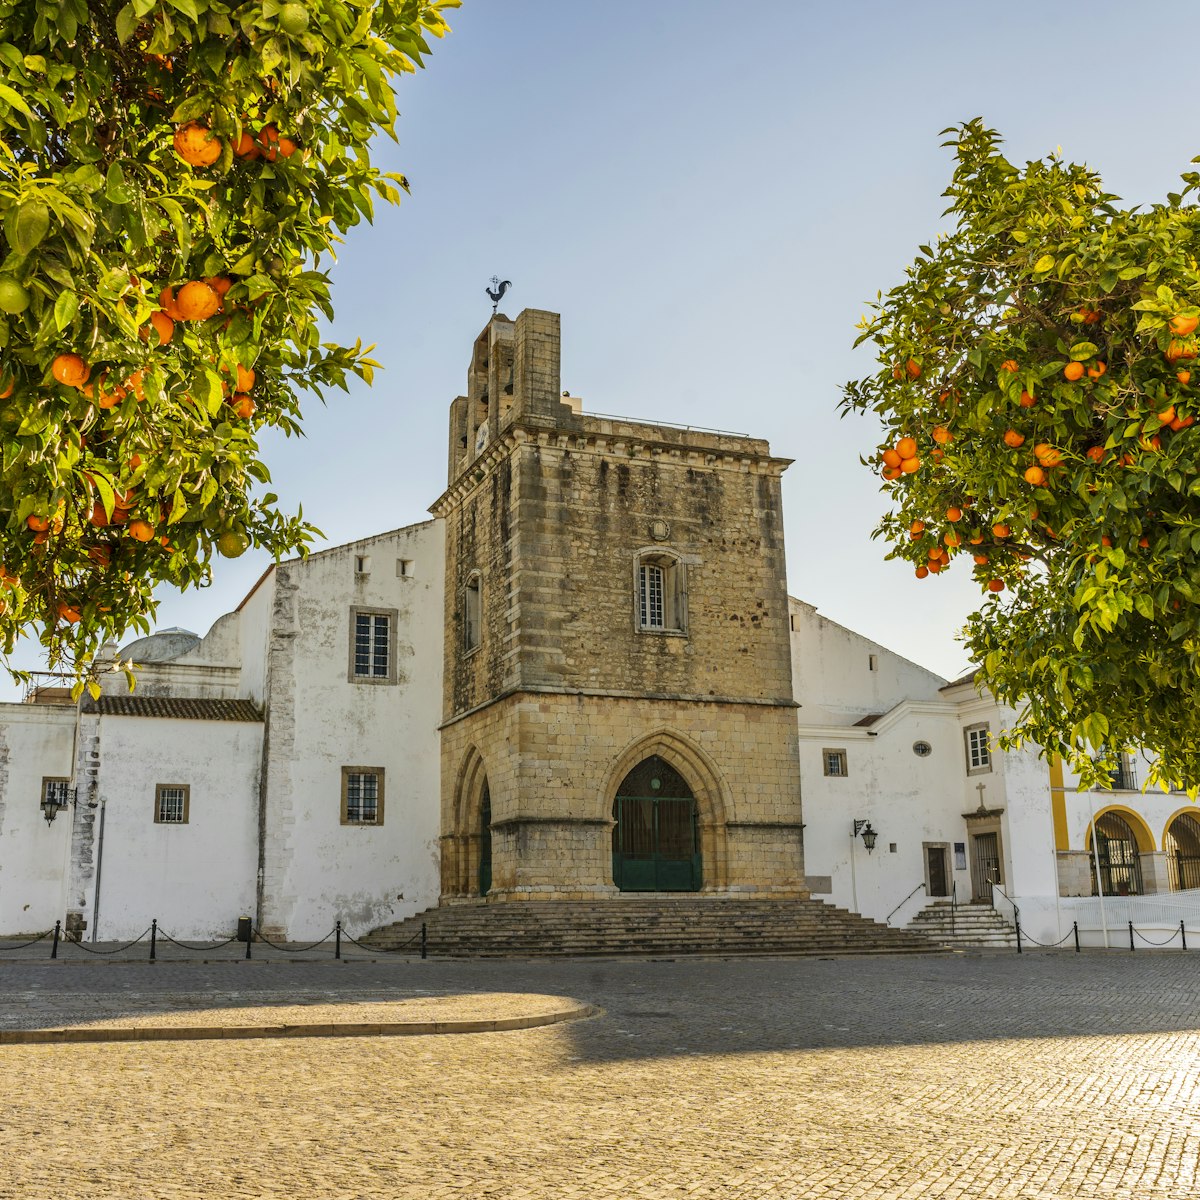 Downtown of Faro with Se Cathedral in the morning with orange tree in the foreground, Algarve, Portugal
1472097846
building, view, orange, portuguese, historical, faro